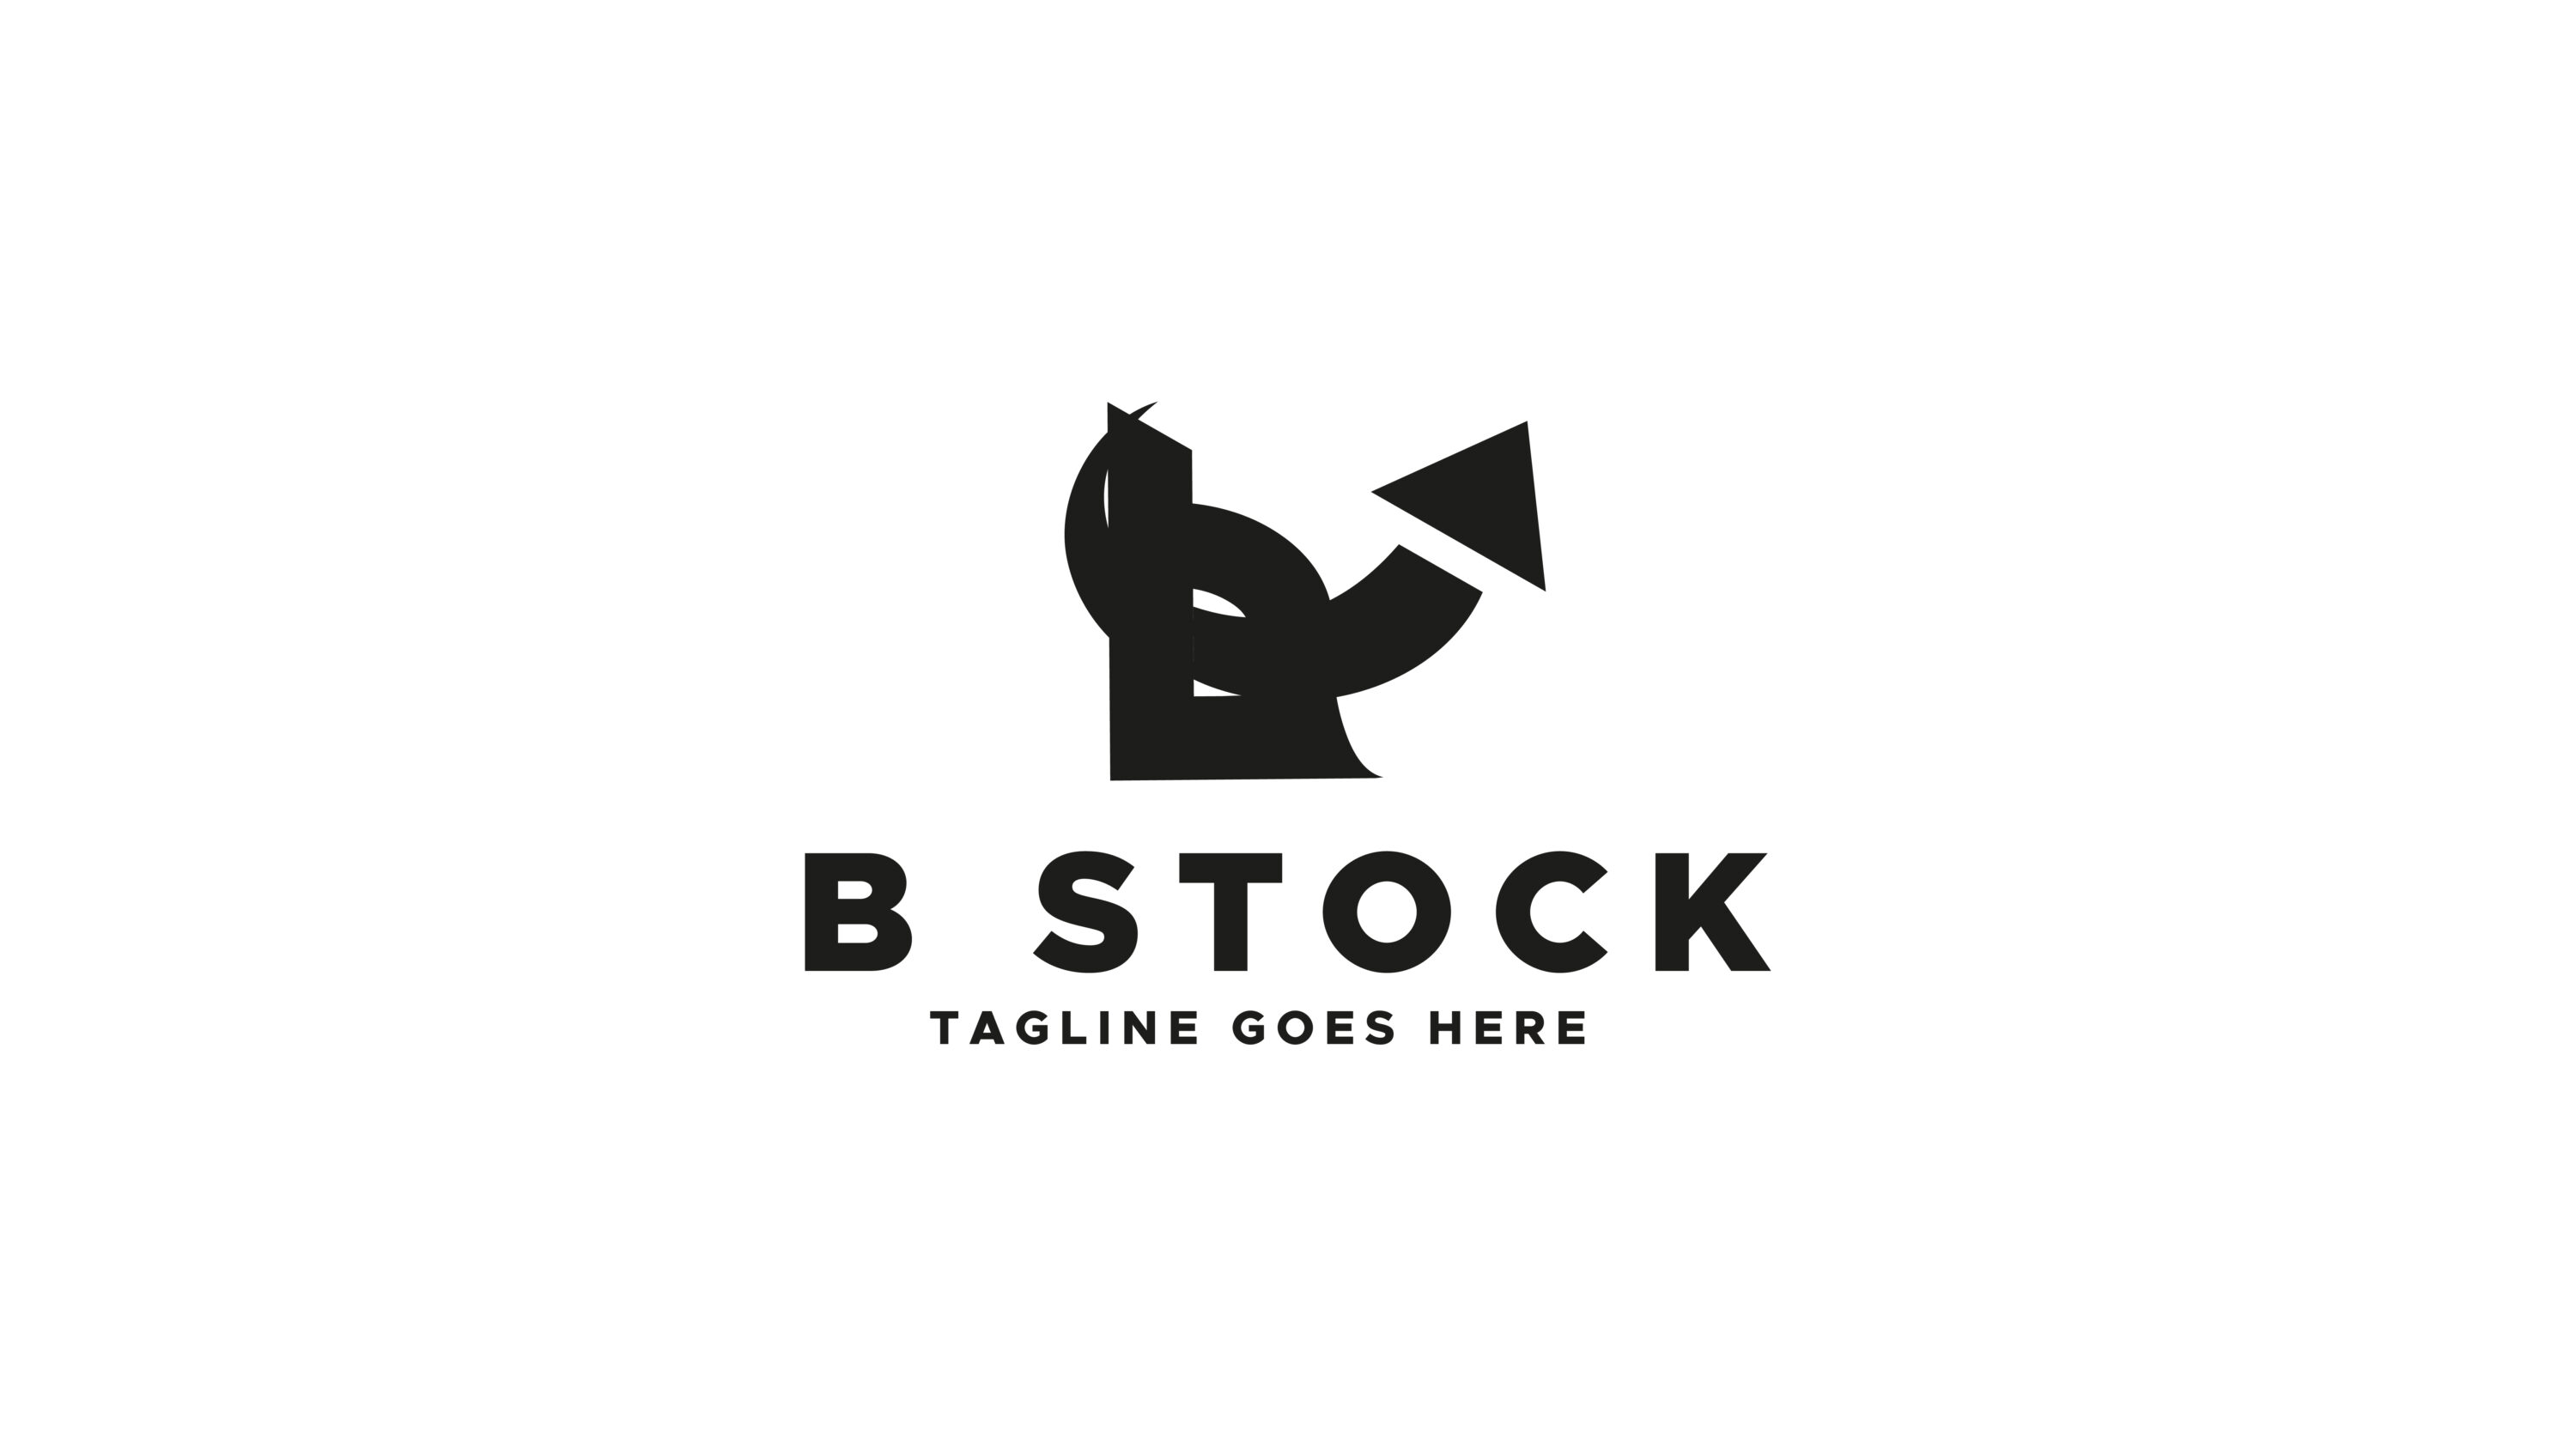 B Letter Logo - B Stock Professional Logo Design Only 10$, black letter with black arrow logo and text.